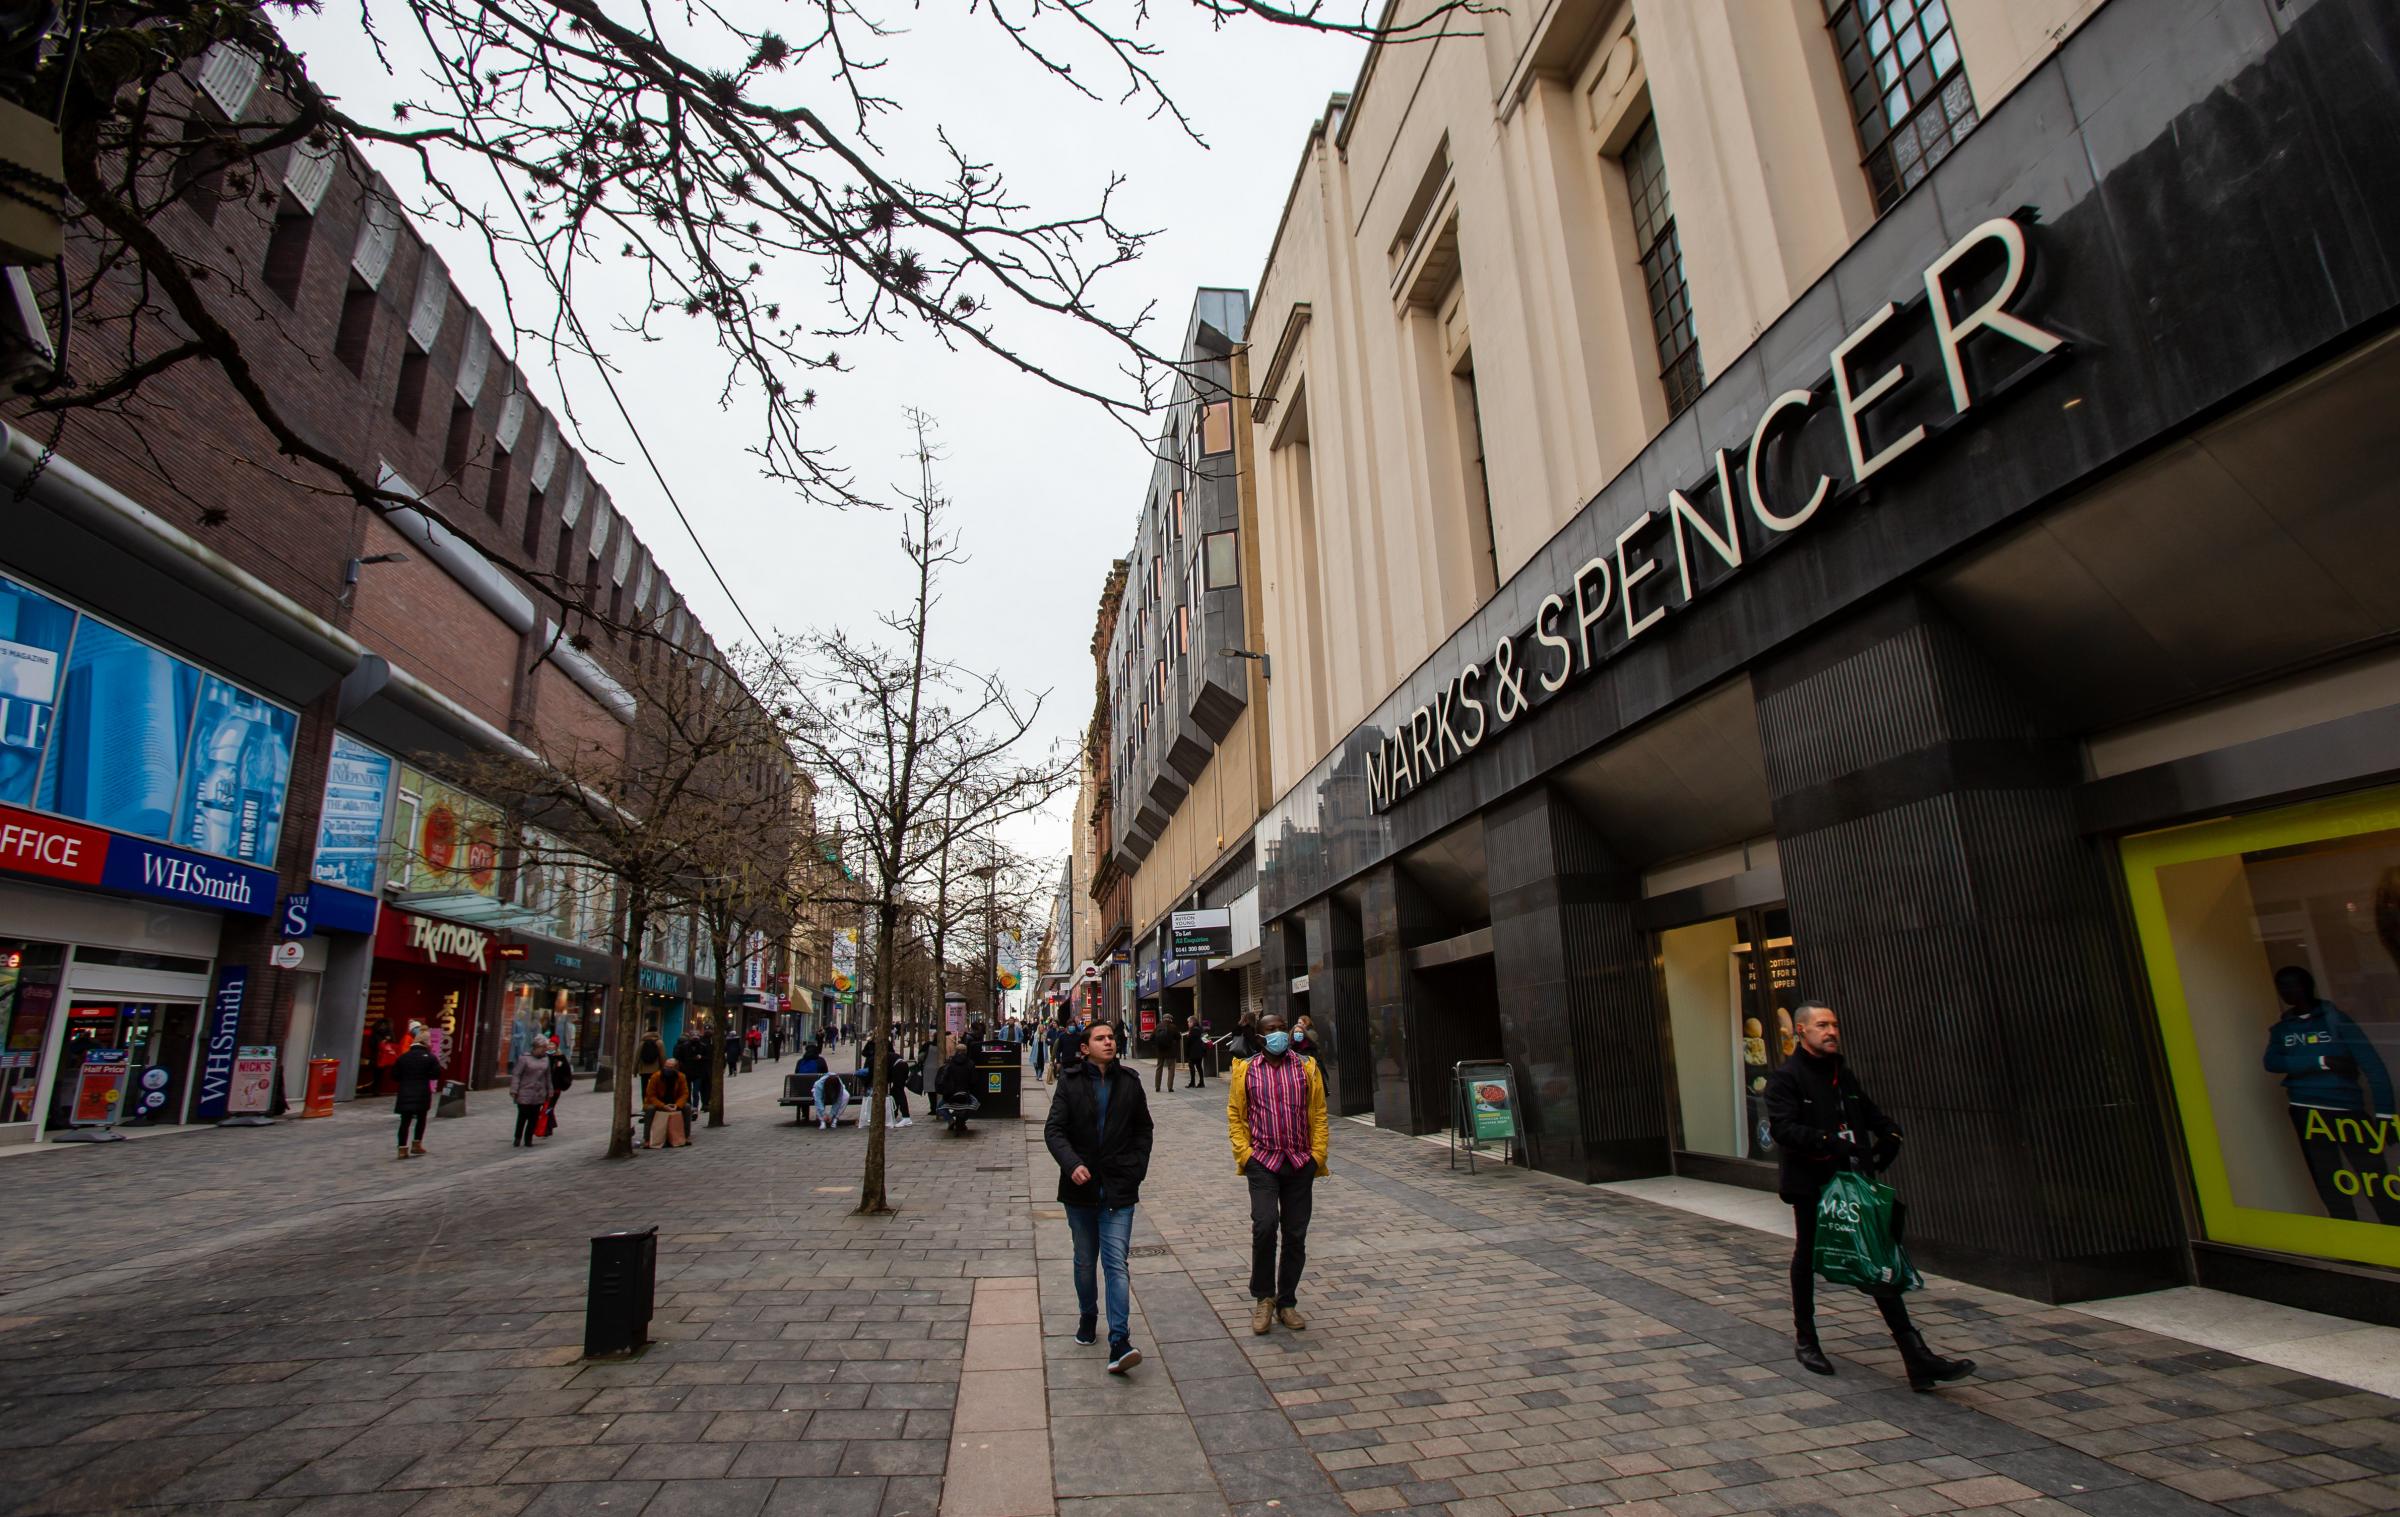 Marks & Spencer store on Sauchiehall Street is closing for good. Photograph by Colin Mearns.